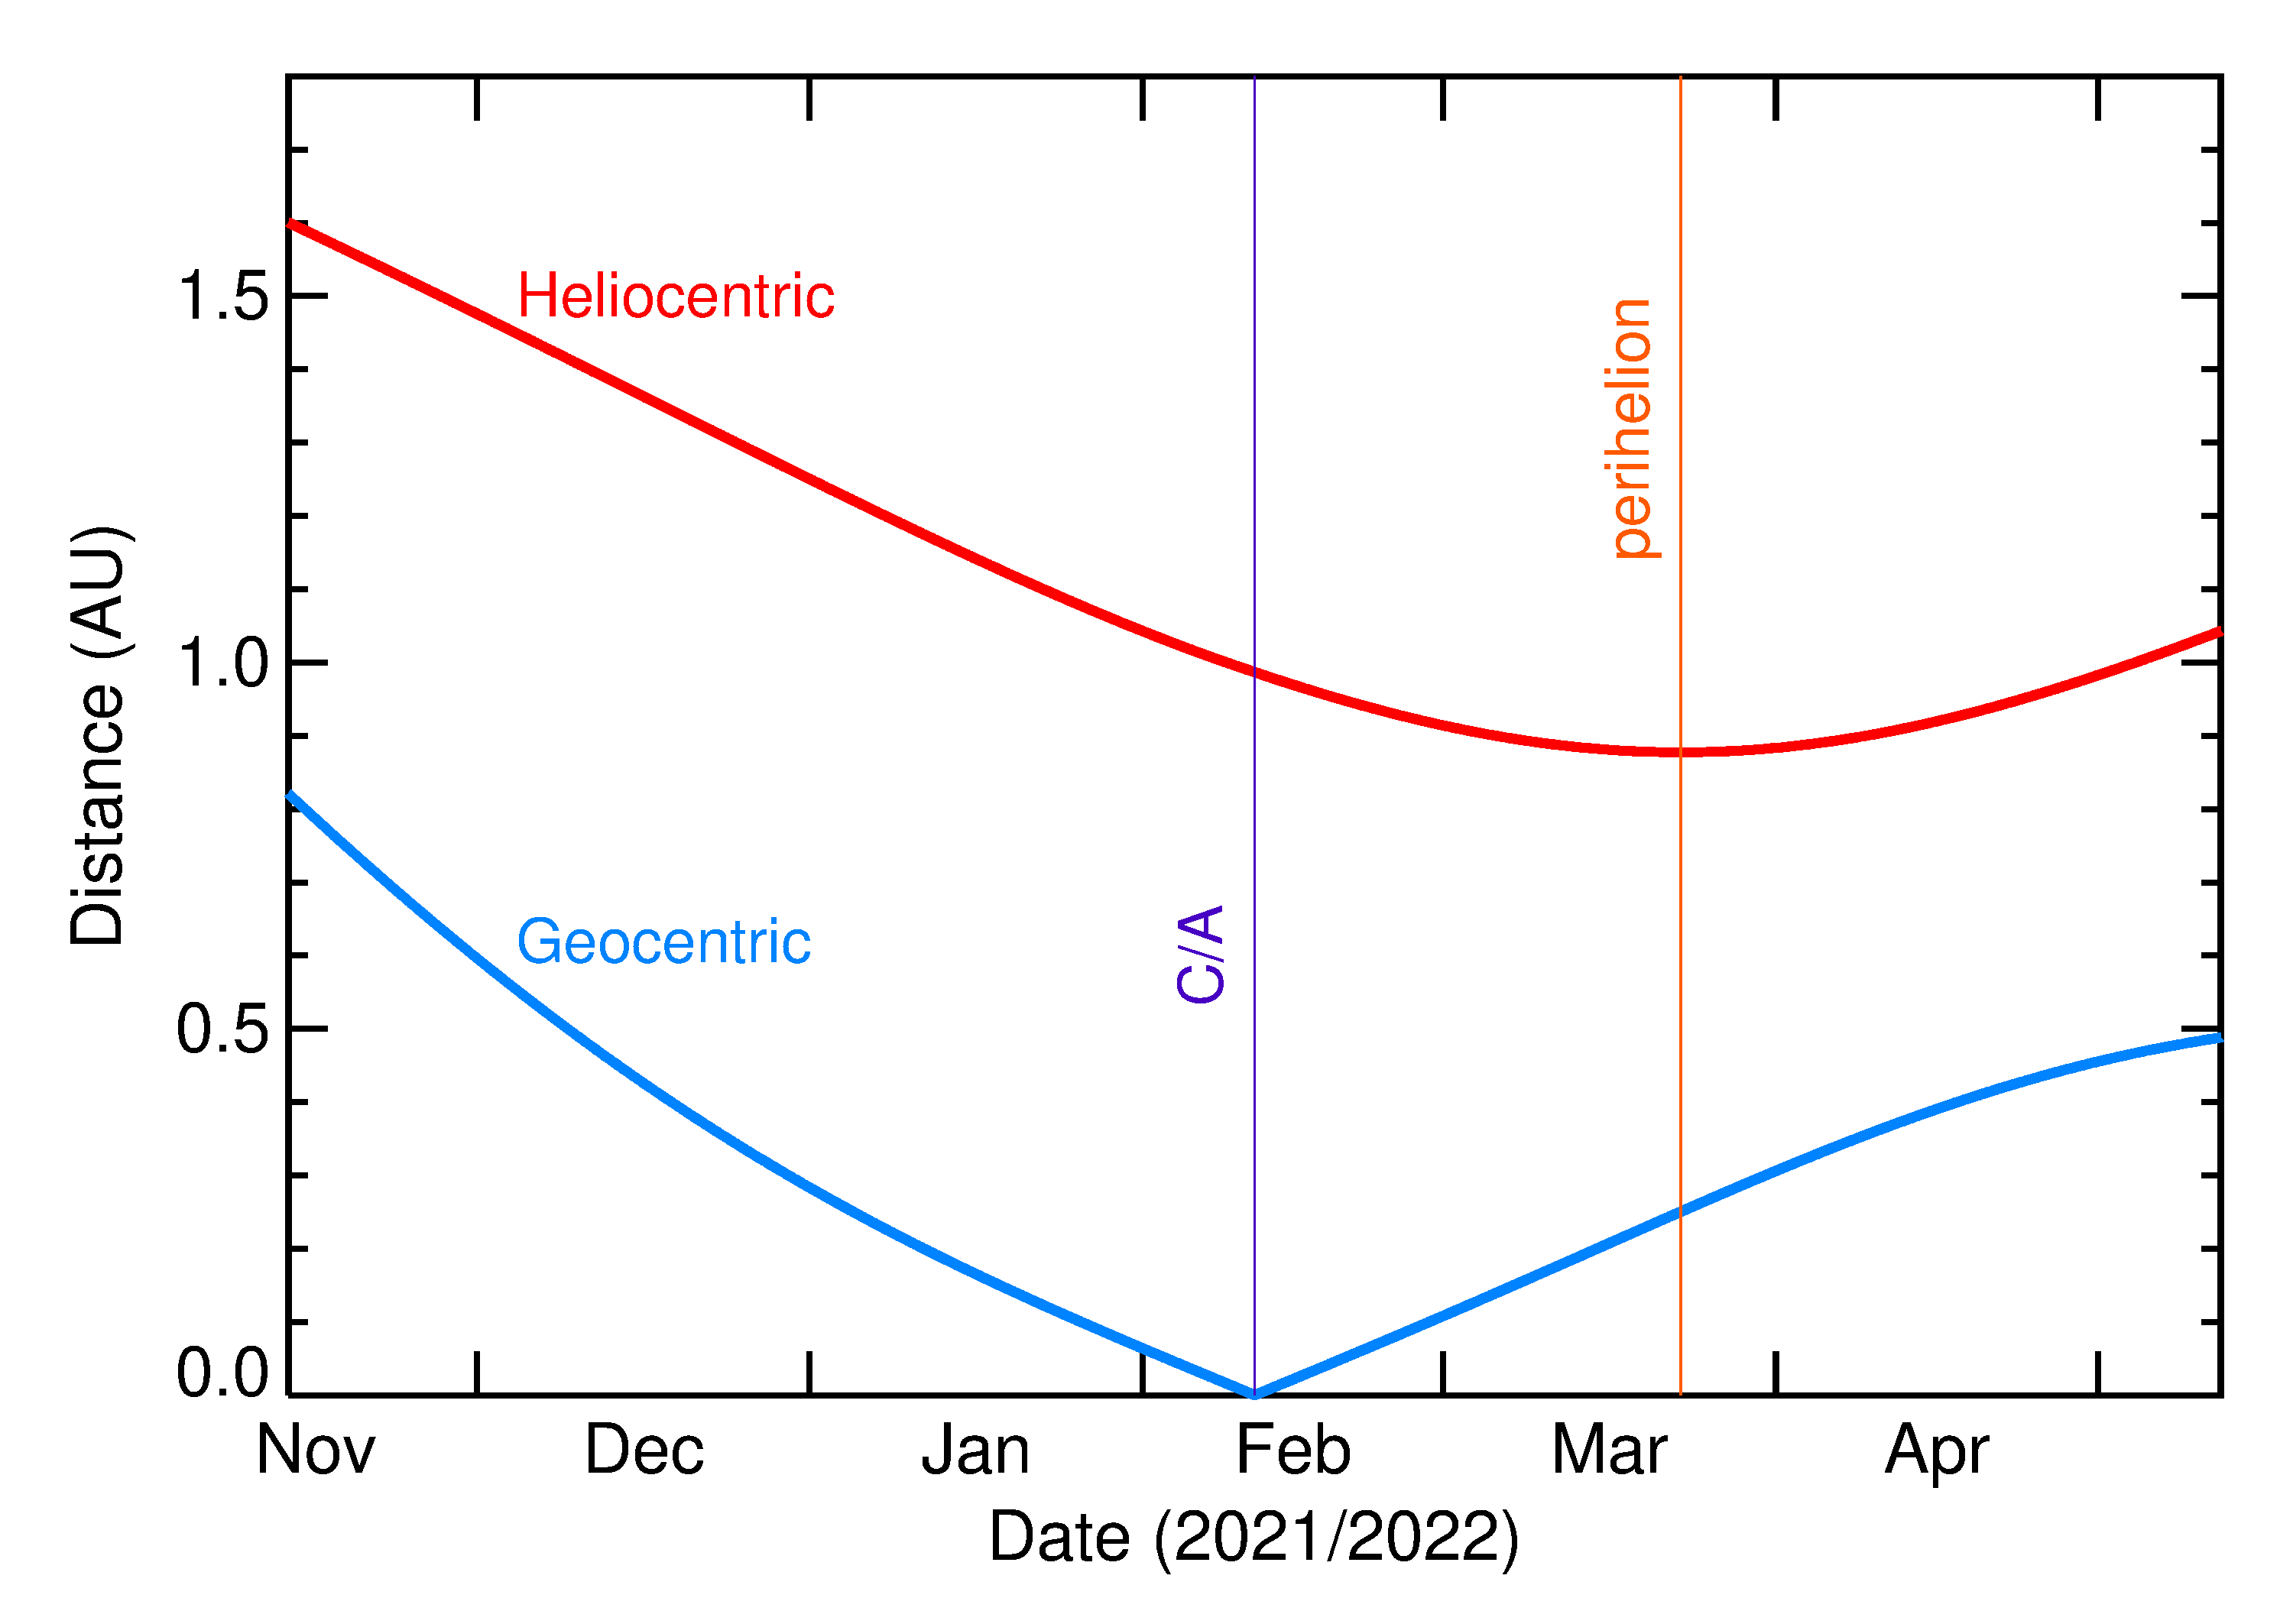 Heliocentric and Geocentric Distances of 2022 CJ5 in the months around closest approach